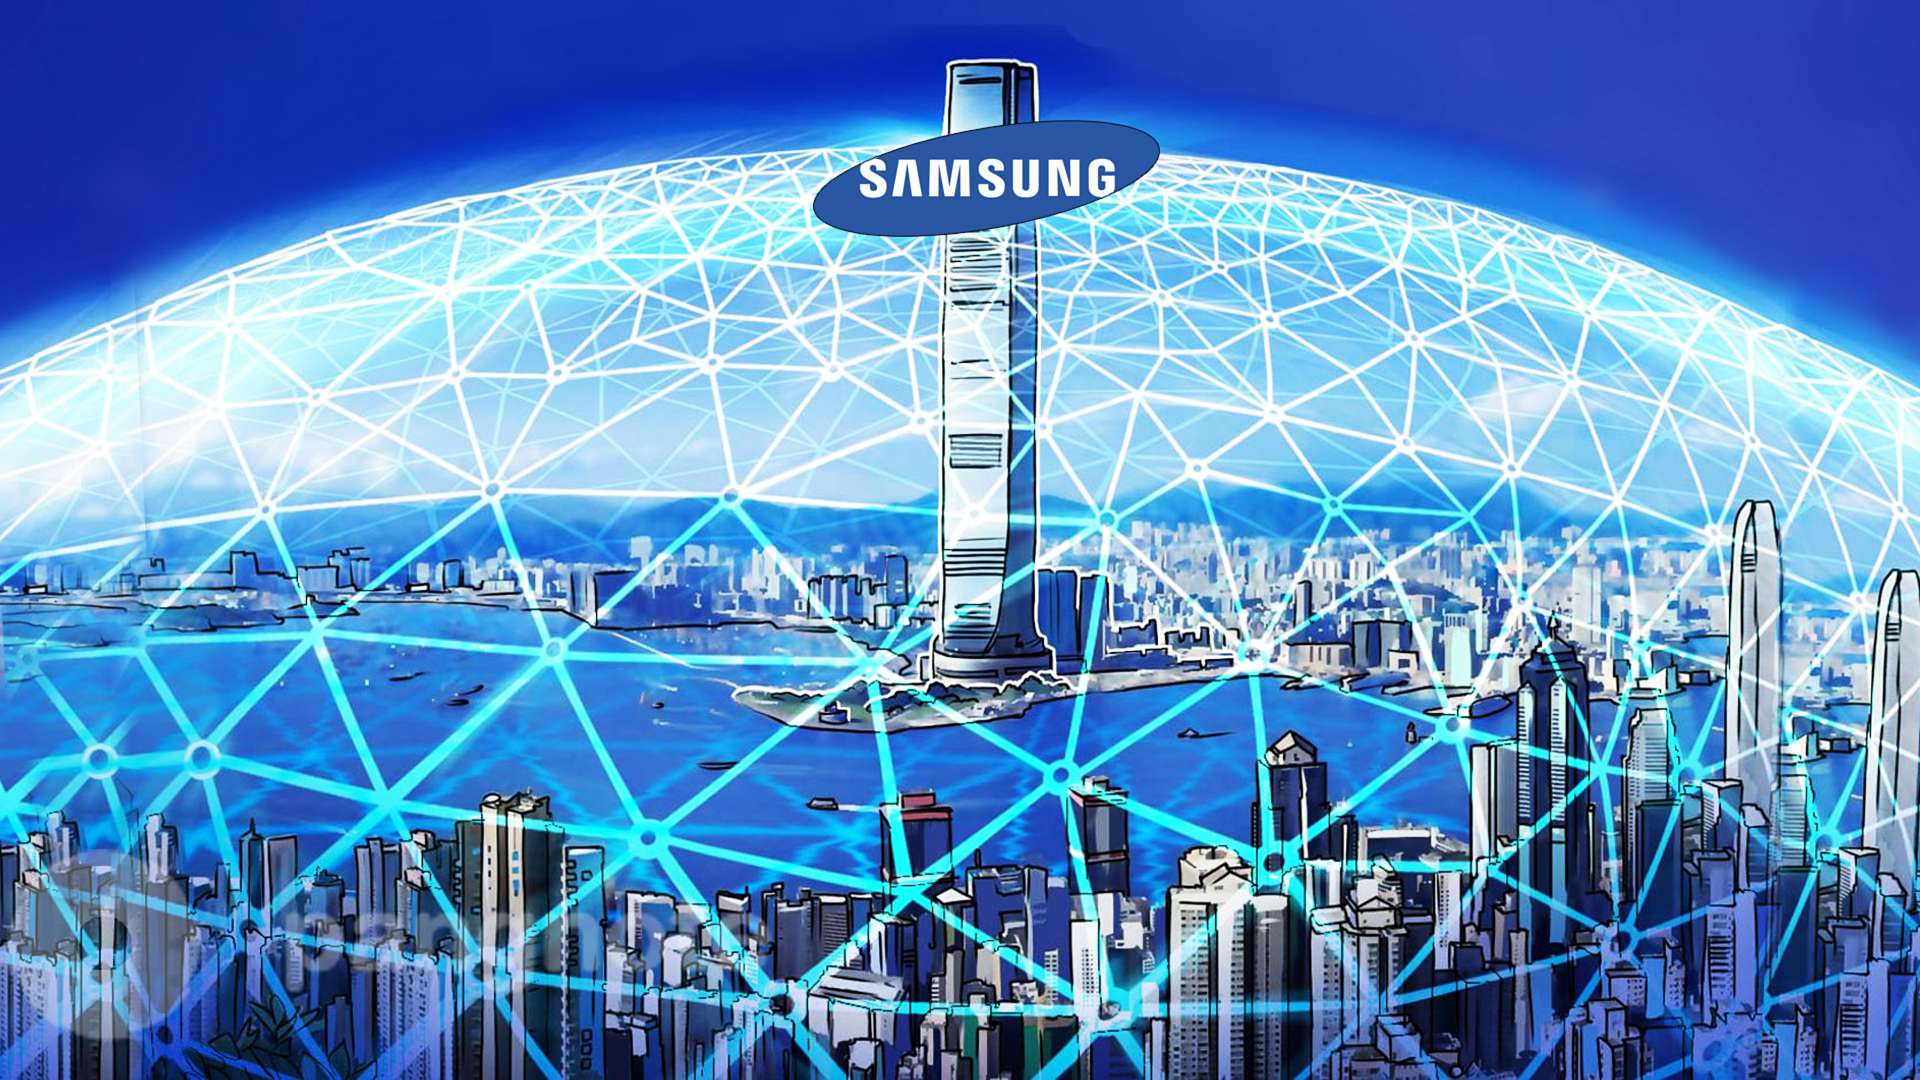 Samsung plans to become one of the telecommunications equipment manufacturers leaders